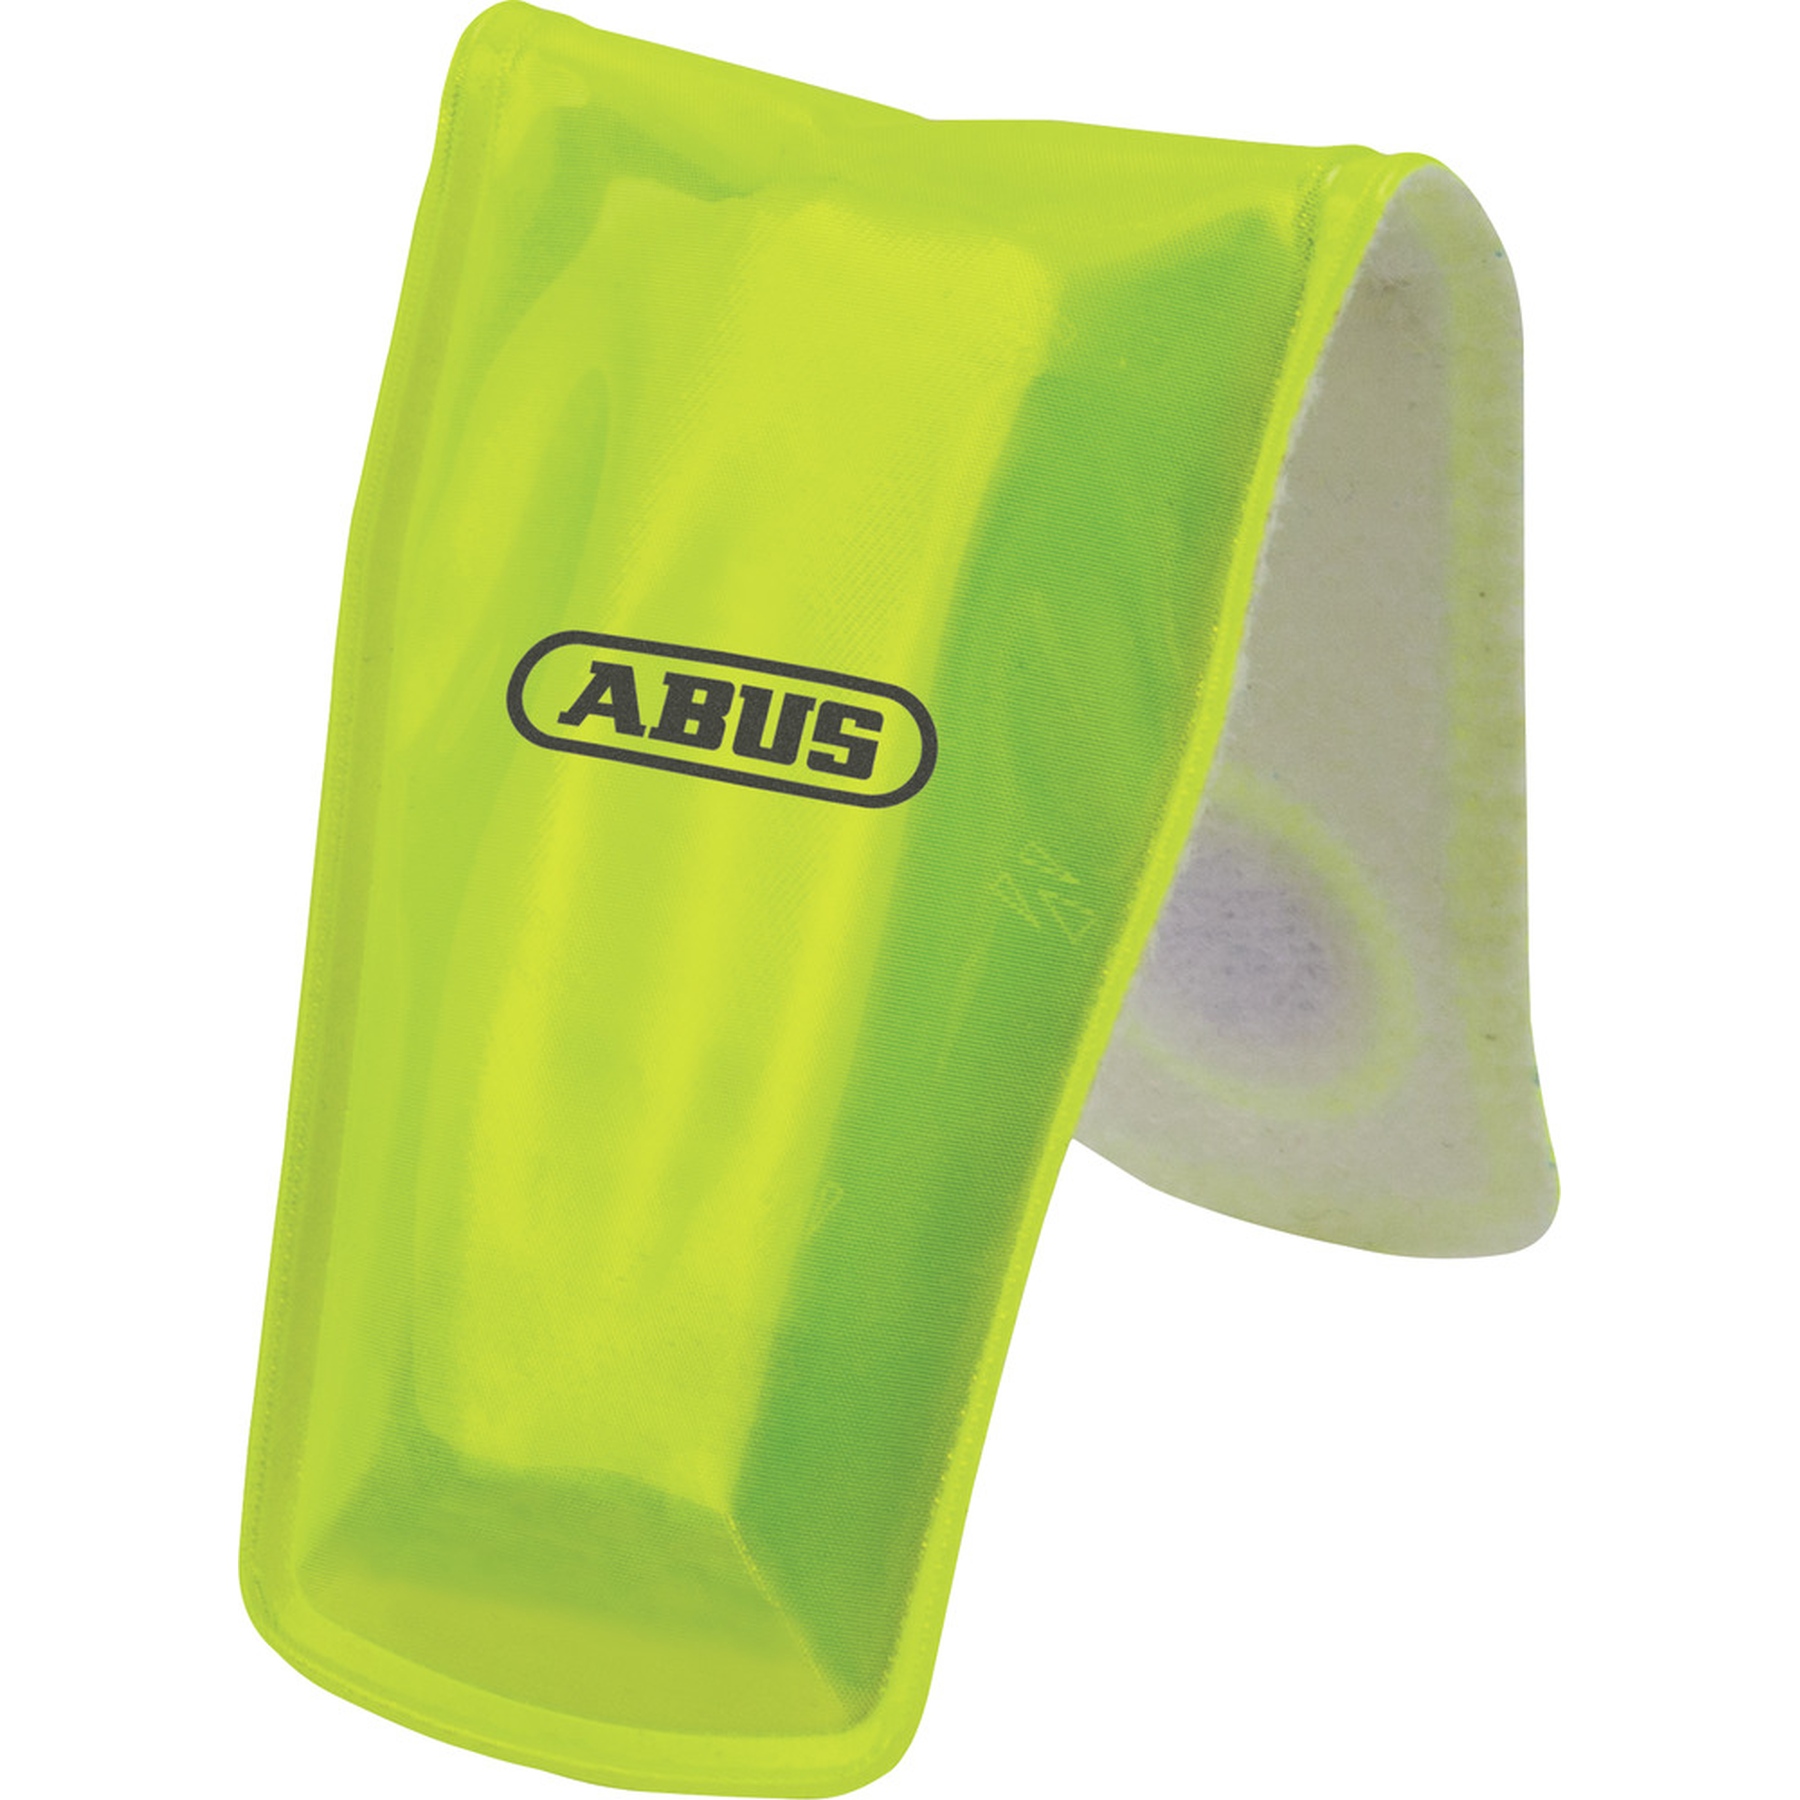 Picture of ABUS Lumino Easy Magnet Light - yellow